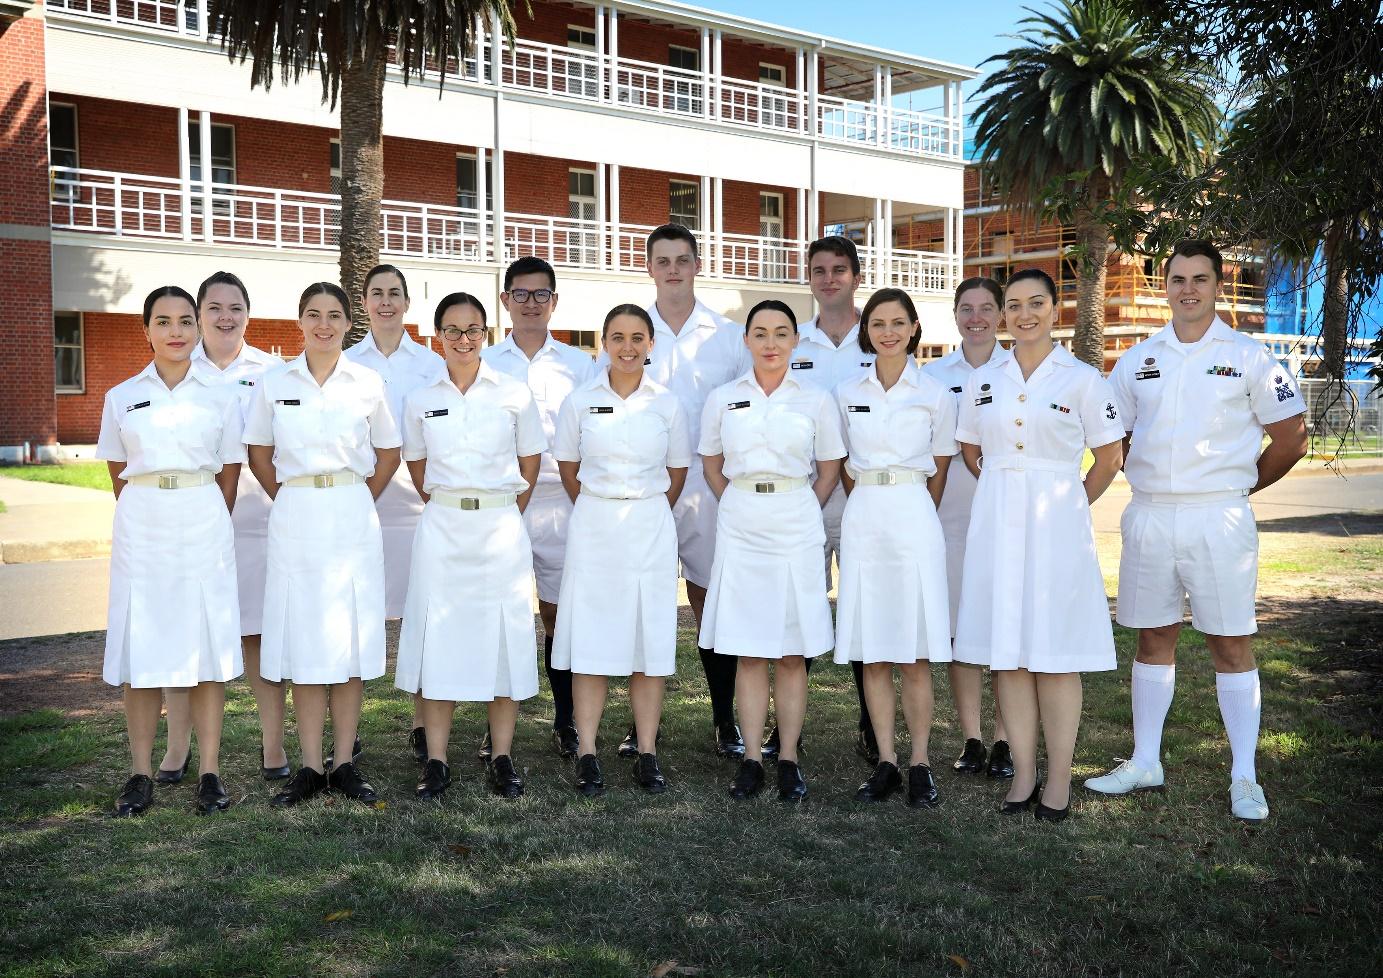 A group of people wearing white uniforms

Description automatically generated with medium confidence